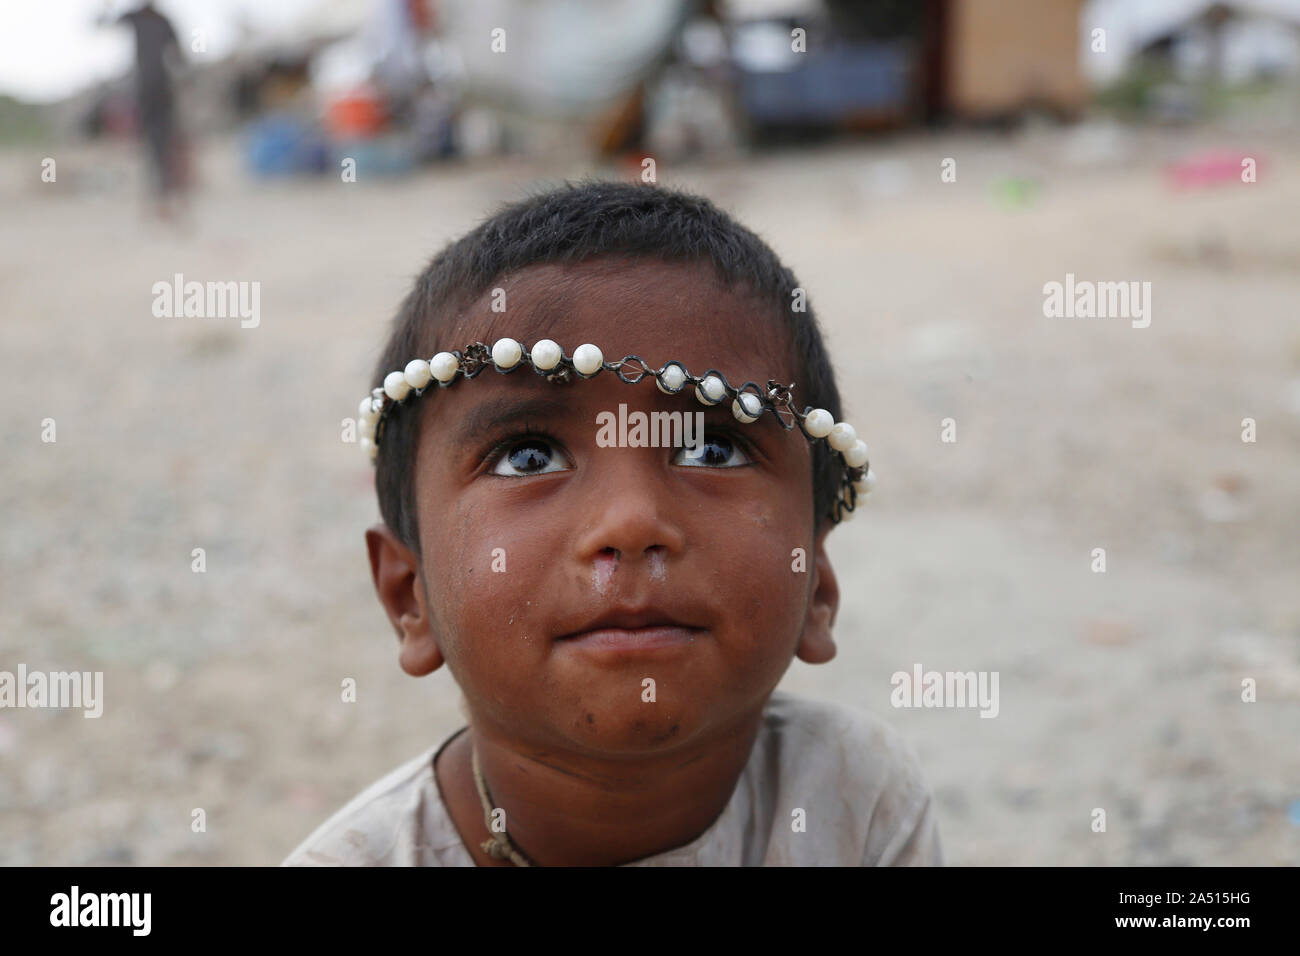 (191017) -- RAWALPINDI, Oct. 17, 2019 (Xinhua) -- A child looks up at the sky in a slum on the outskirts of Rawalpindi, Pakistan, Oct. 17, 2019. Oct. 17, 2019 marks the 27th International Day for the Eradication of Poverty. (Photo by Ahmad Kamal/Xinhua) Stock Photo